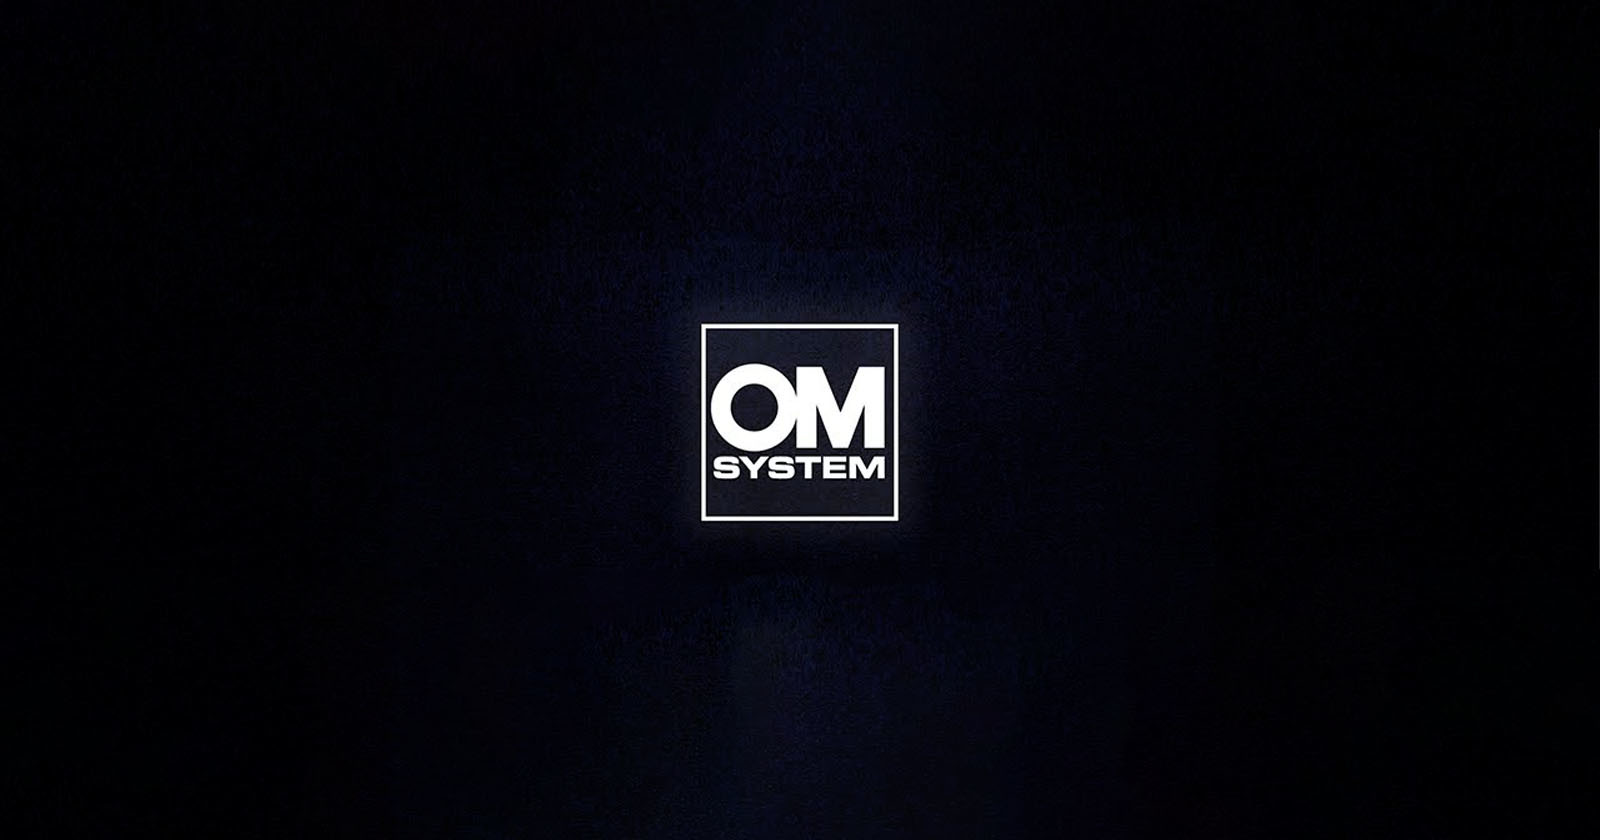 OM Digital Developing a 90mm f/3.5 Macro Lens for Micro Four Thirds